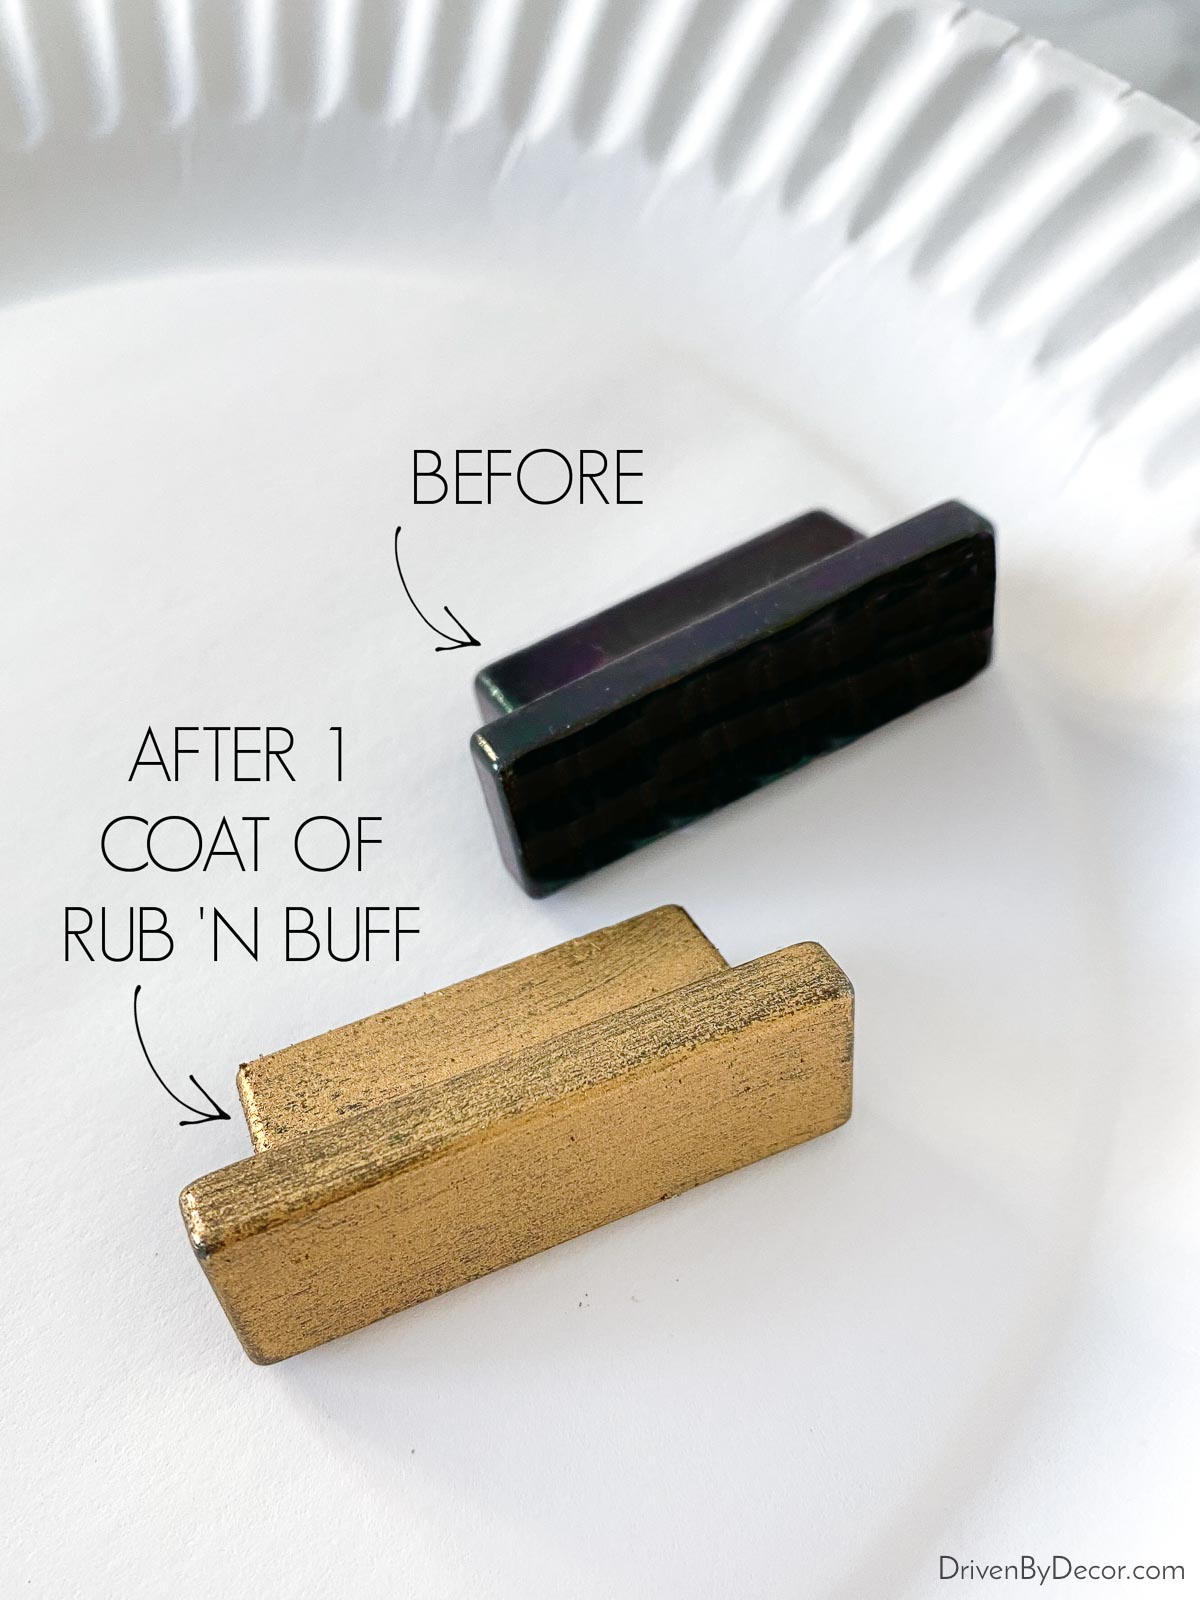 How to Antique Brass with Rub n Buff - She Holds Dearly